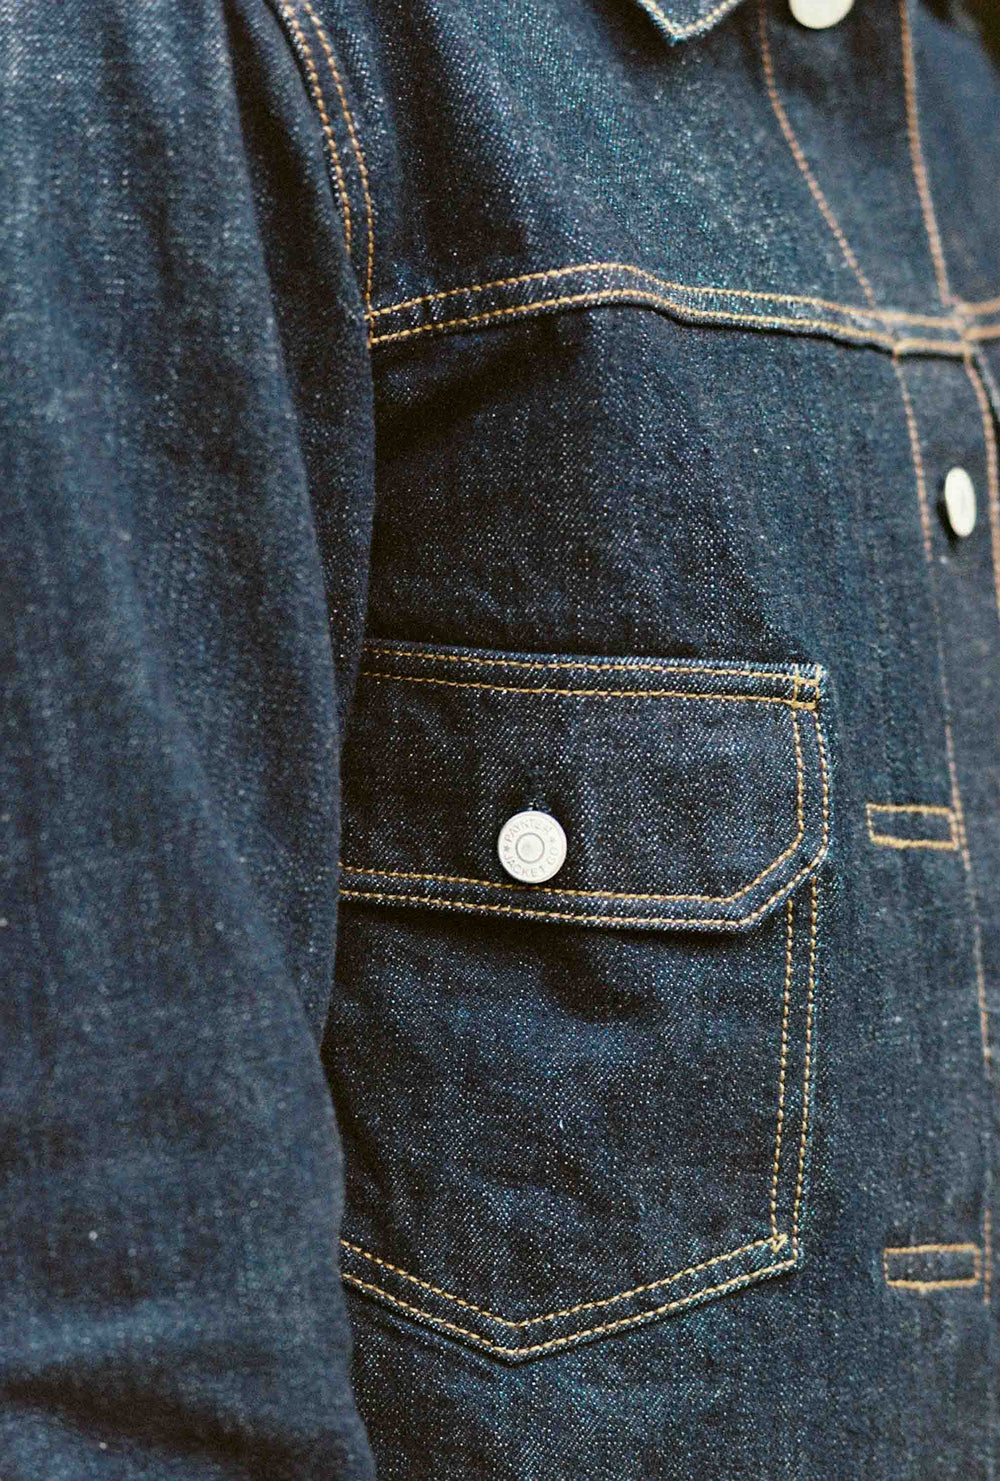 Gallery images of the MEN'S BATCH NO.9 - DARK RINSE WASH